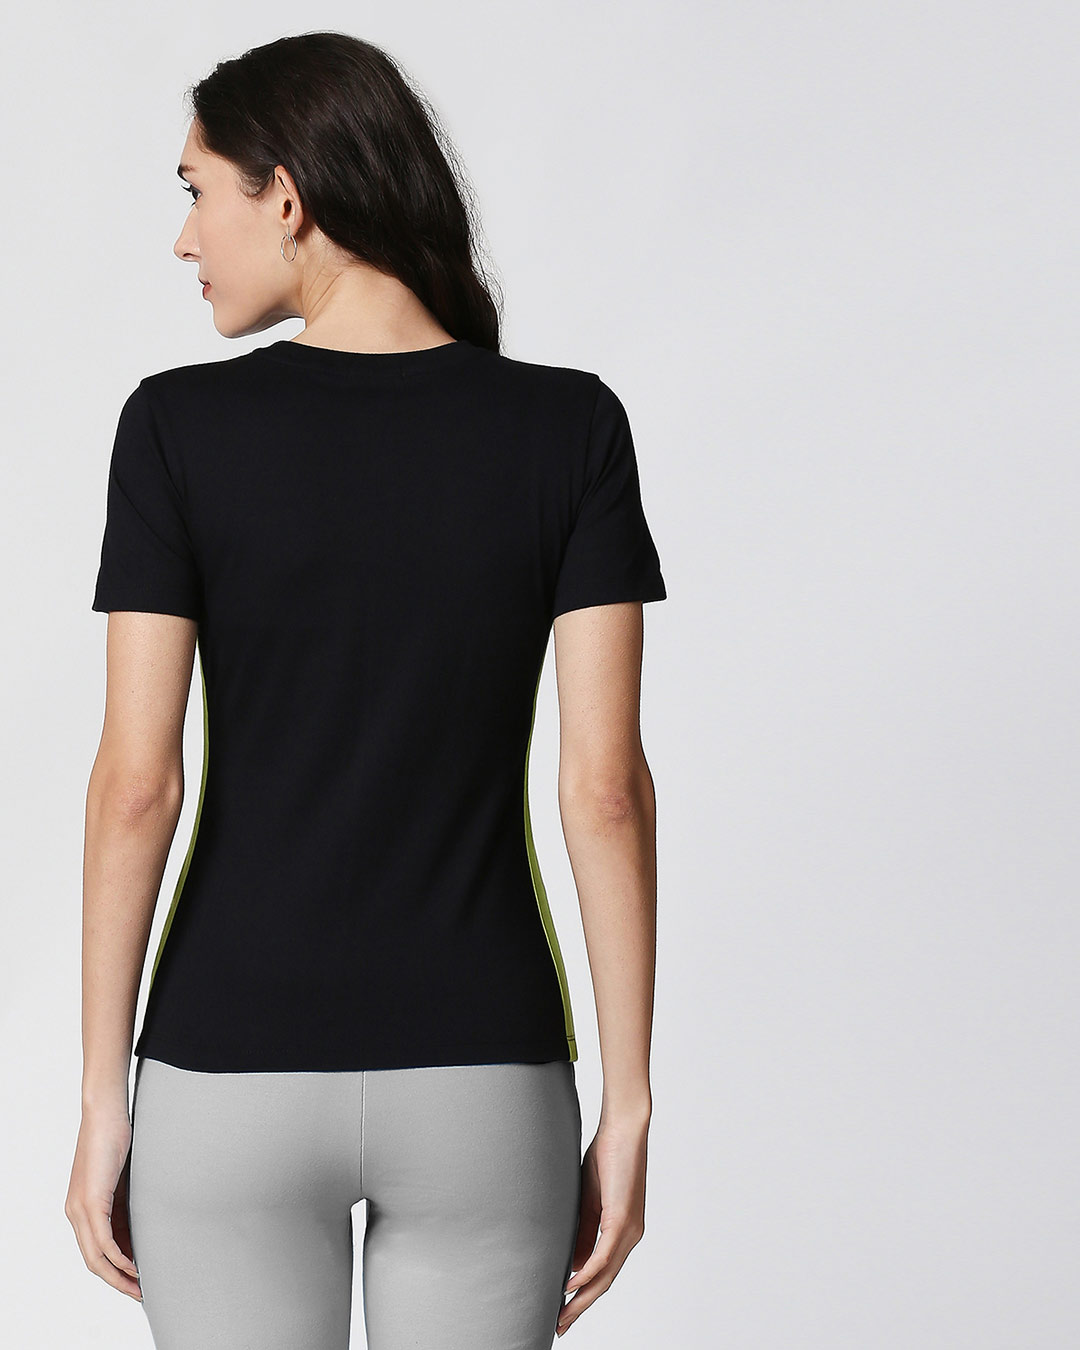 Shop Done For The Year Contrast Side Seam Panel T-Shirt Black-Neon Green-Back